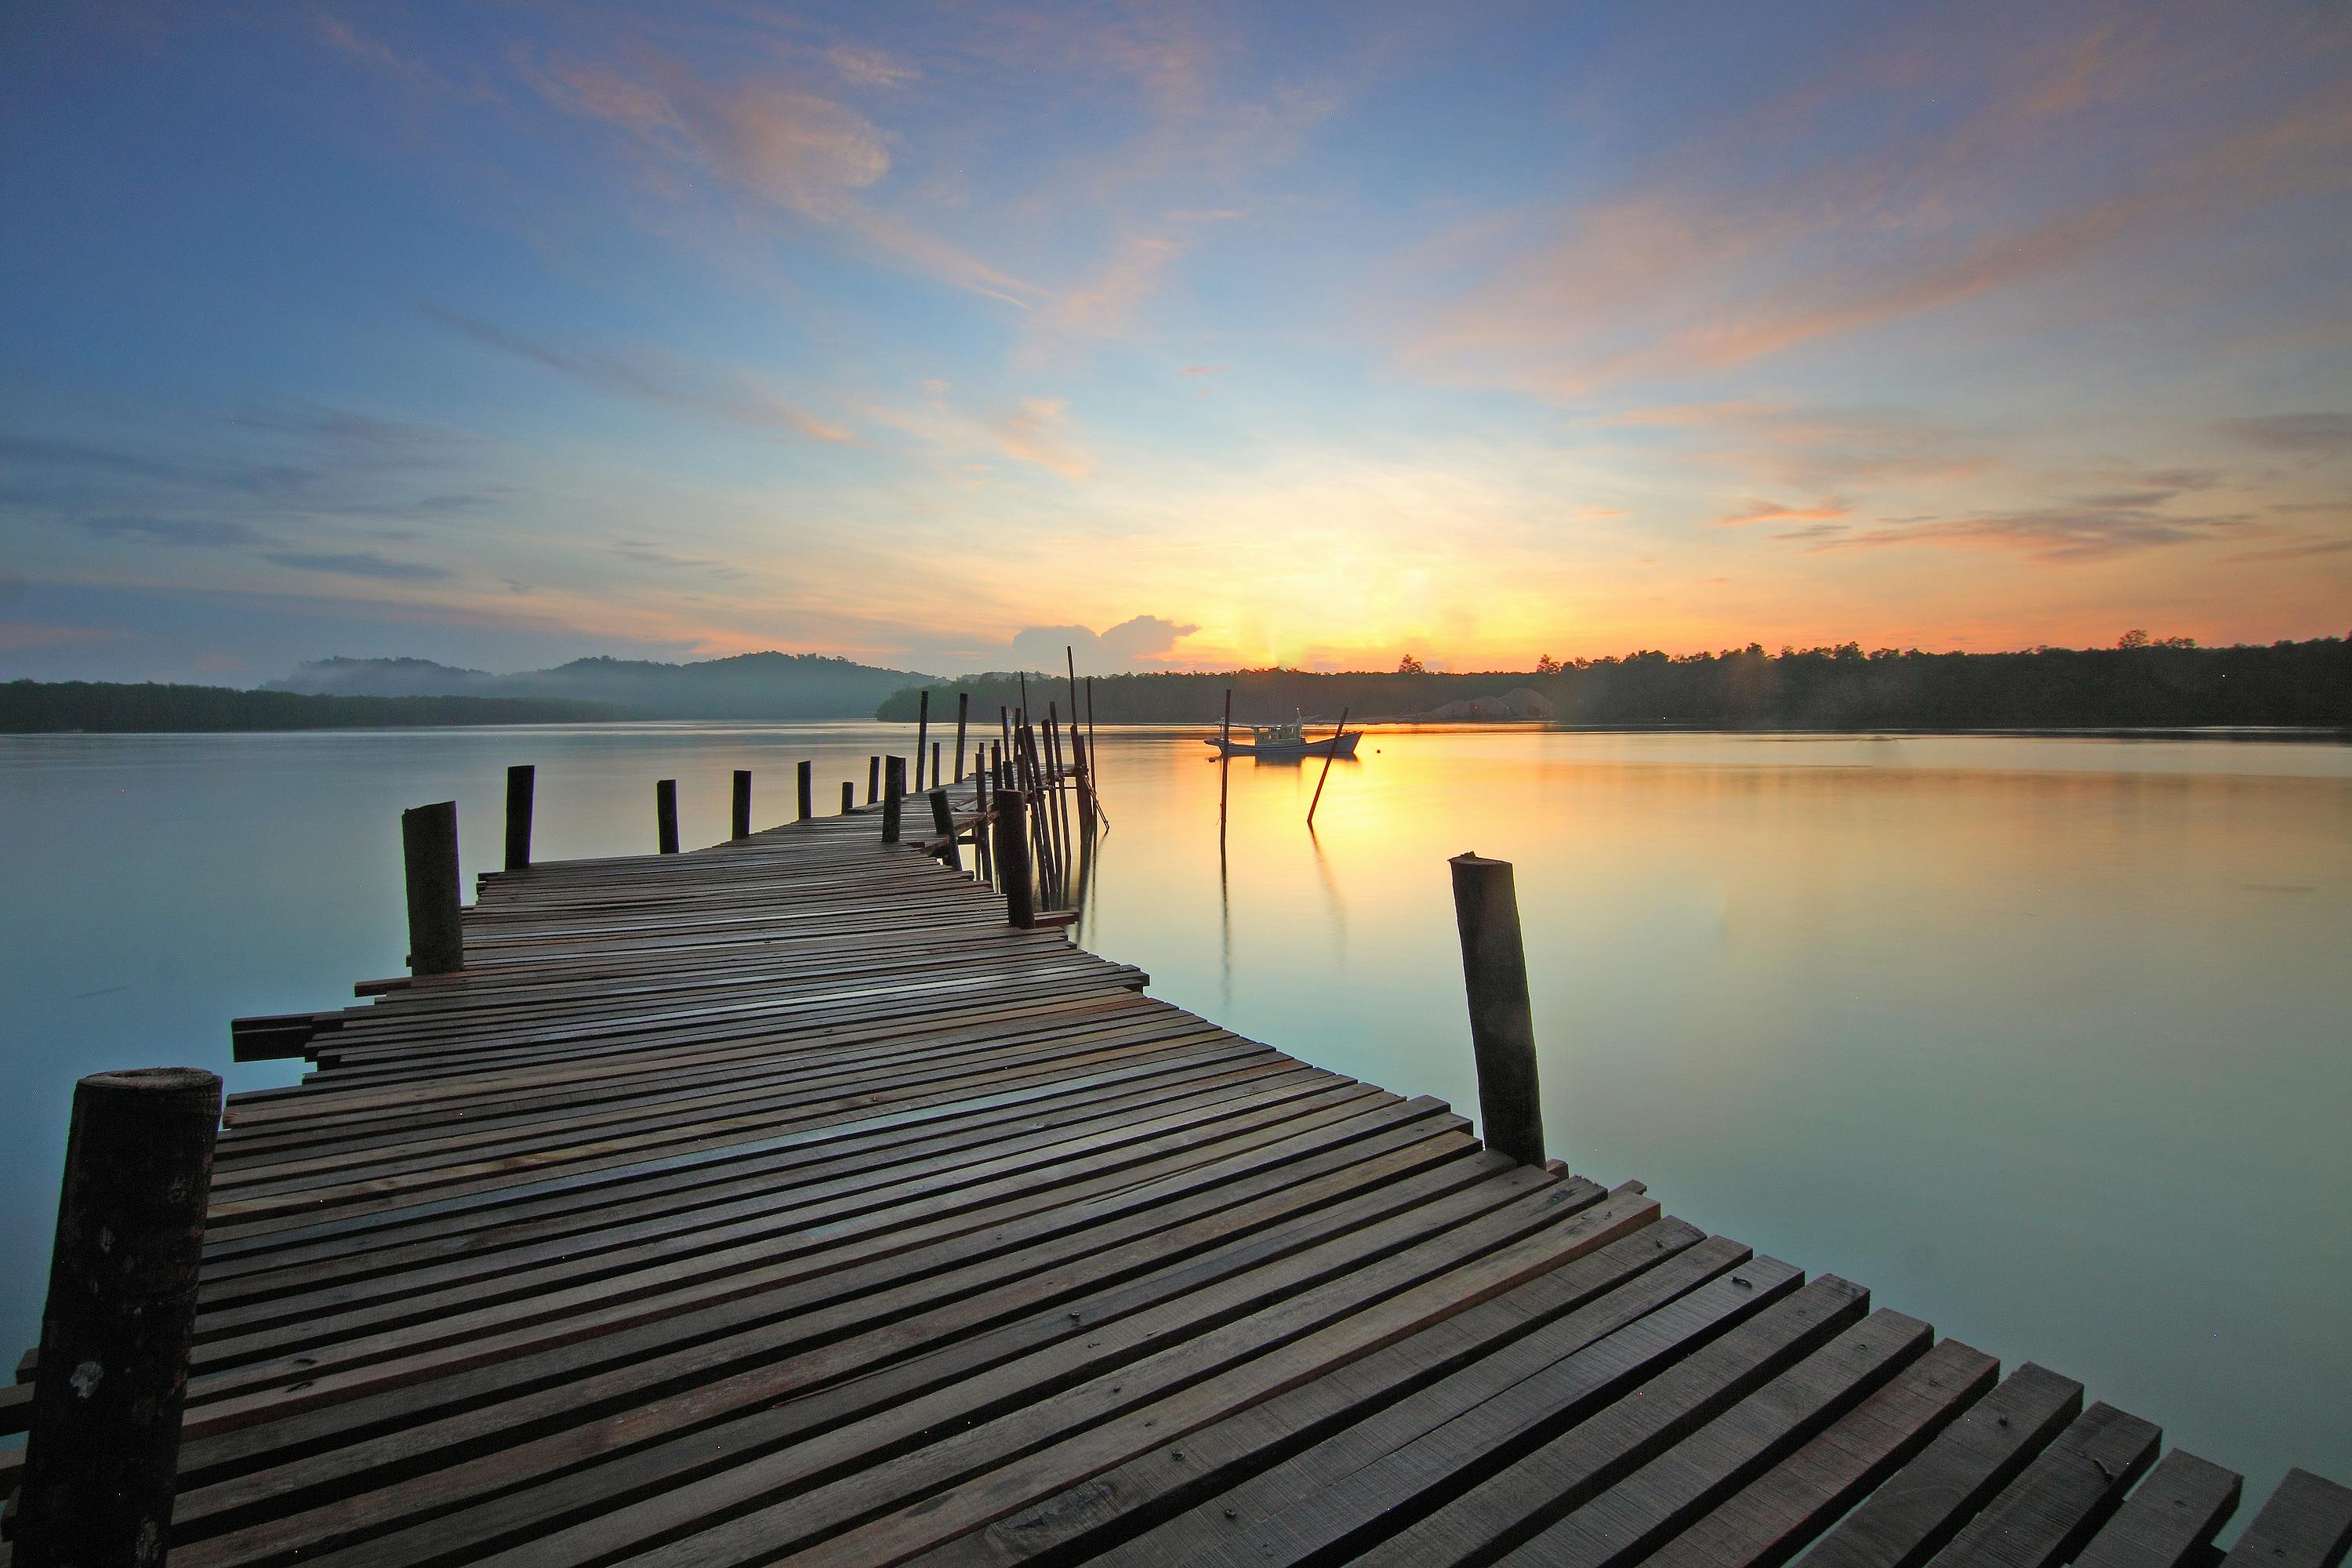 Brown Wooden Dock on Calm Body of Water Surrounded by 